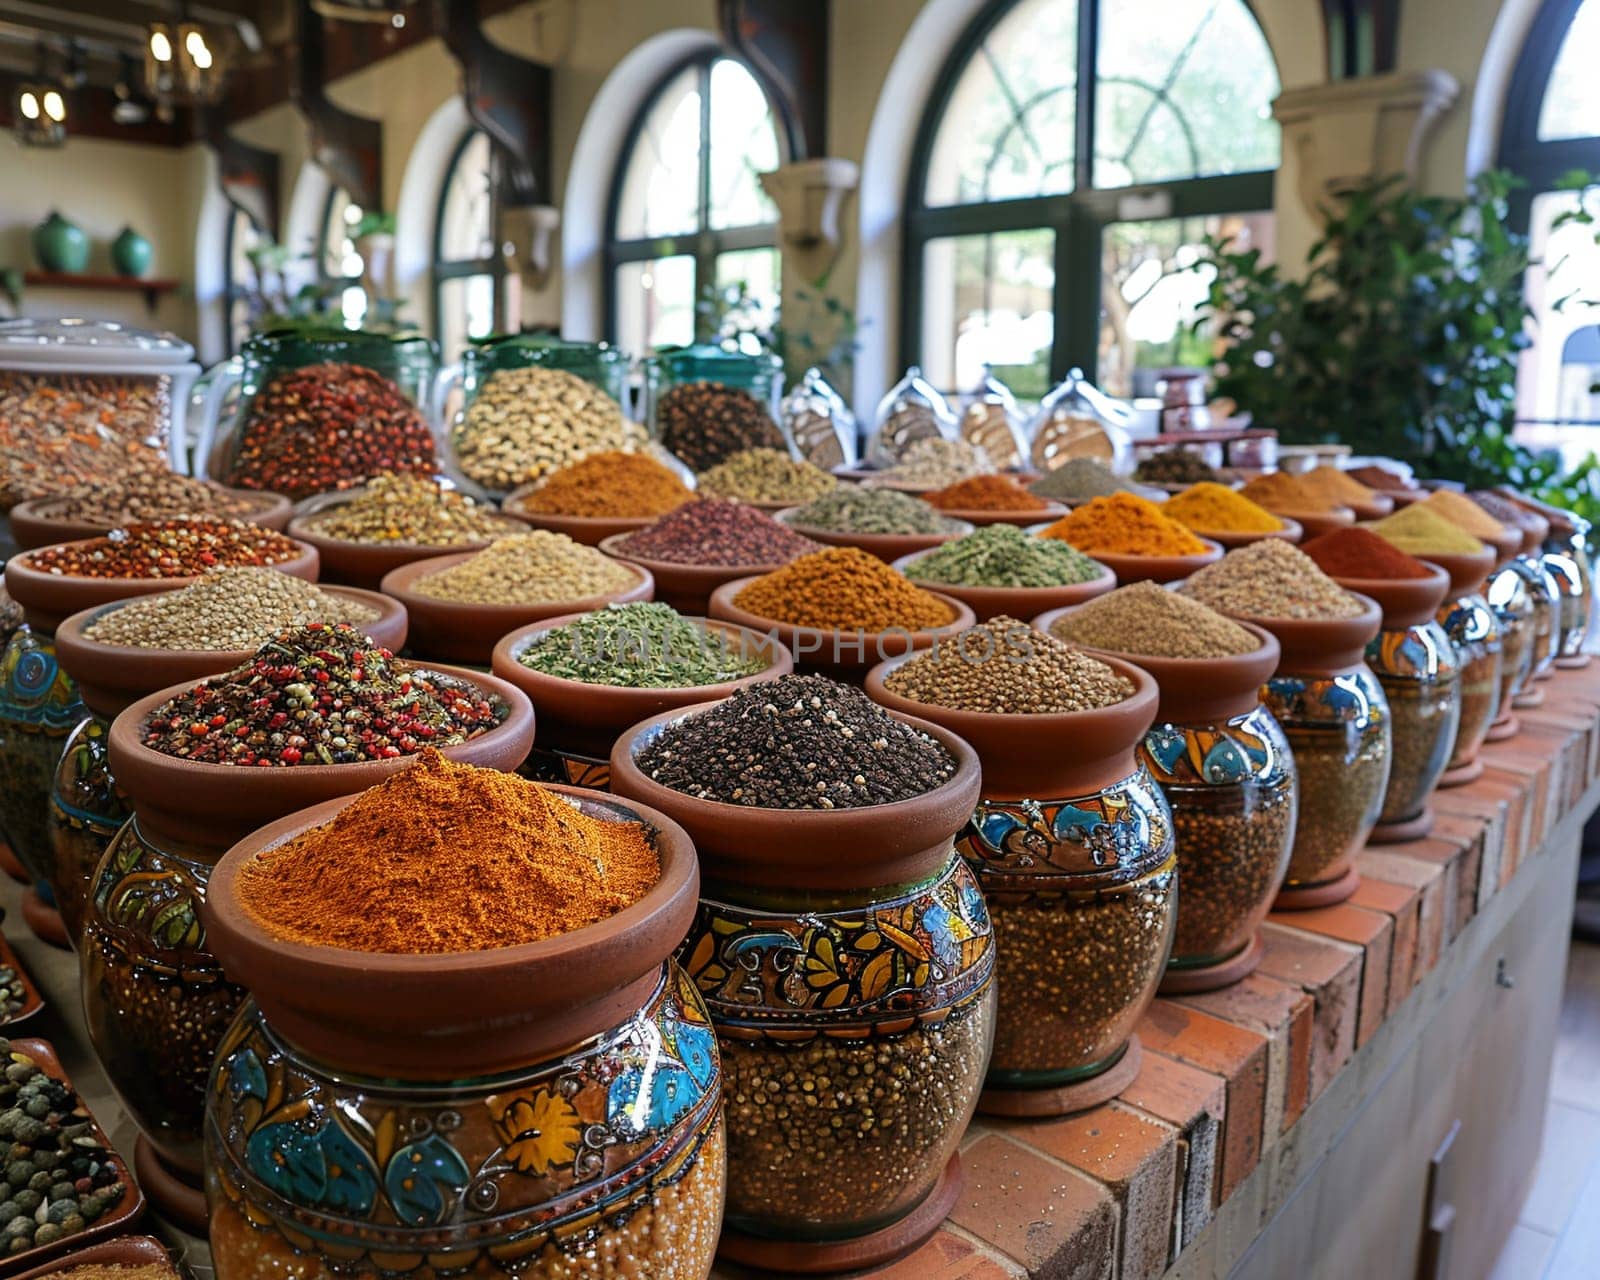 World Spice Emporium Flavors Dishes with Adventure in Business of Cooking and Cultural Discovery, Spice grinders and flavor profiles flavor dishes with adventure and cooking in the world spice emporium business.